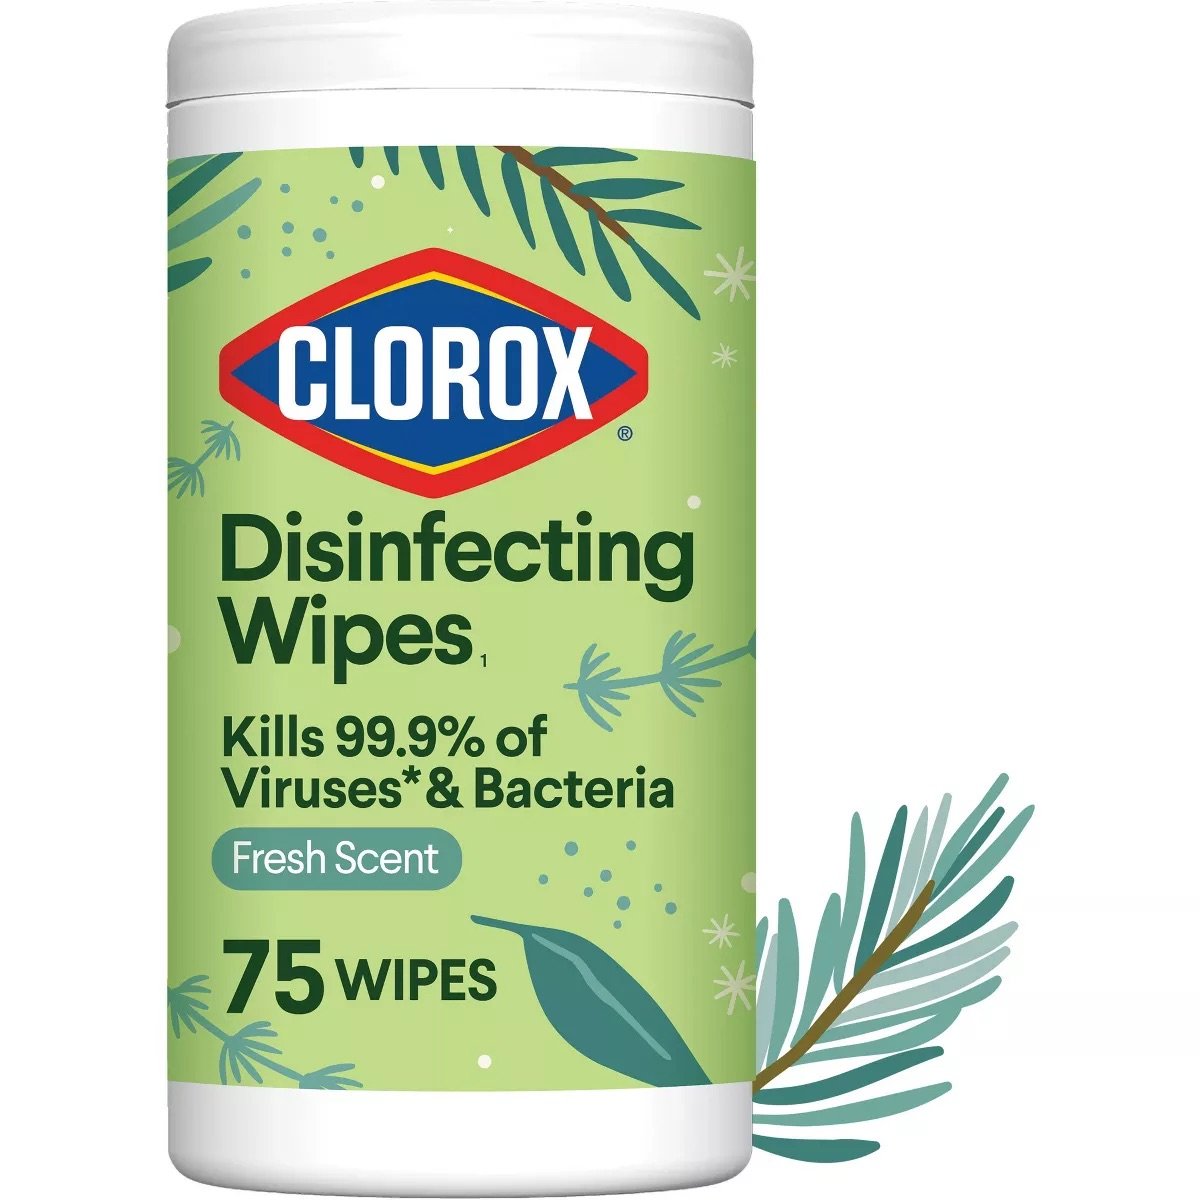 Disinfecting Wipes - Clorox Disinfecting Wipes - Fresh Scent.jpeg